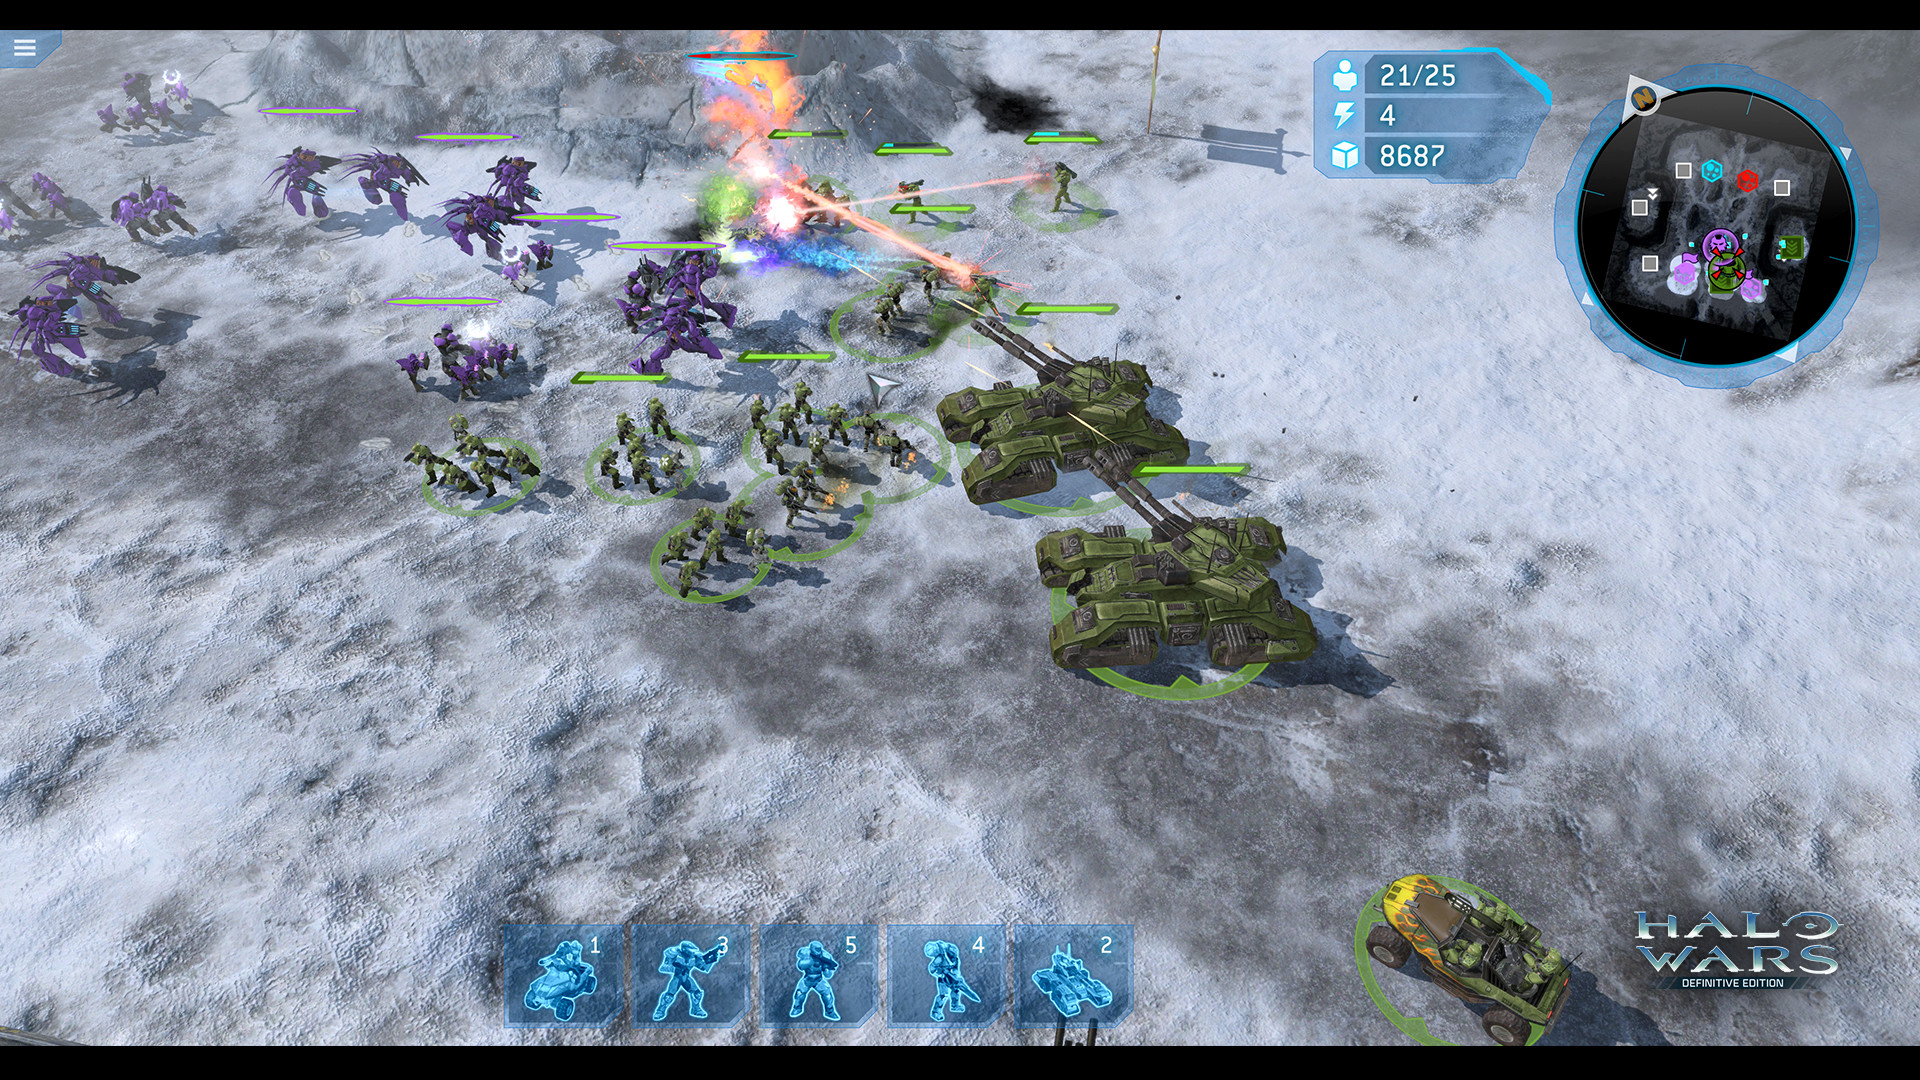 Find the best laptops for Halo Wars